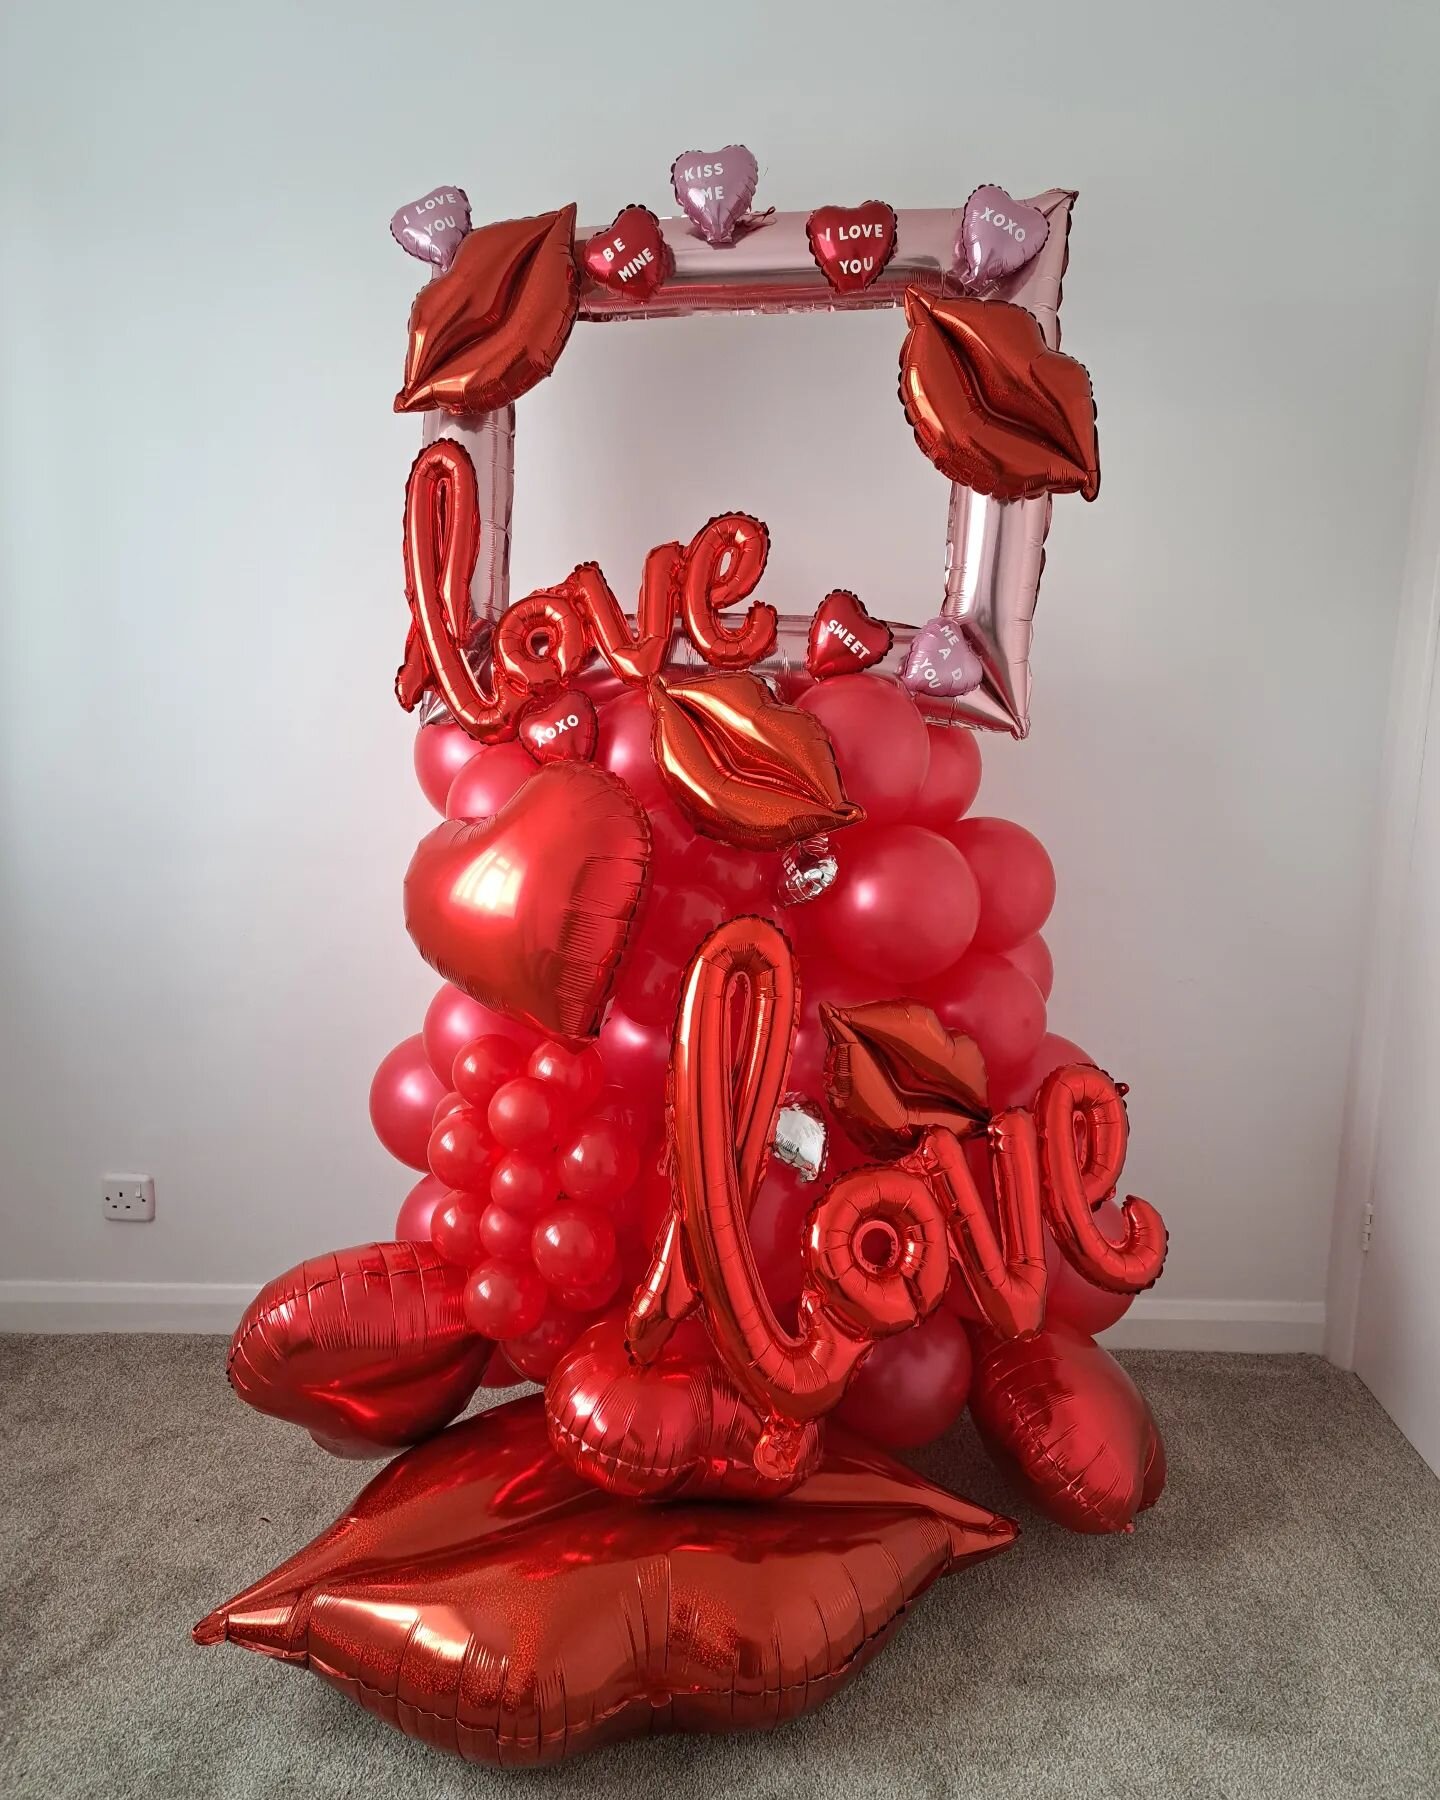 You've heard of the #photobooth but have you heard of the #lovebooth

Event; #valentinesdecor #love
Theme; Valentine's Day 
Location; #cheshunt
Decor &amp; Styling; @etseventsdecor

Contact us today to find out how we can transform your #themed #part